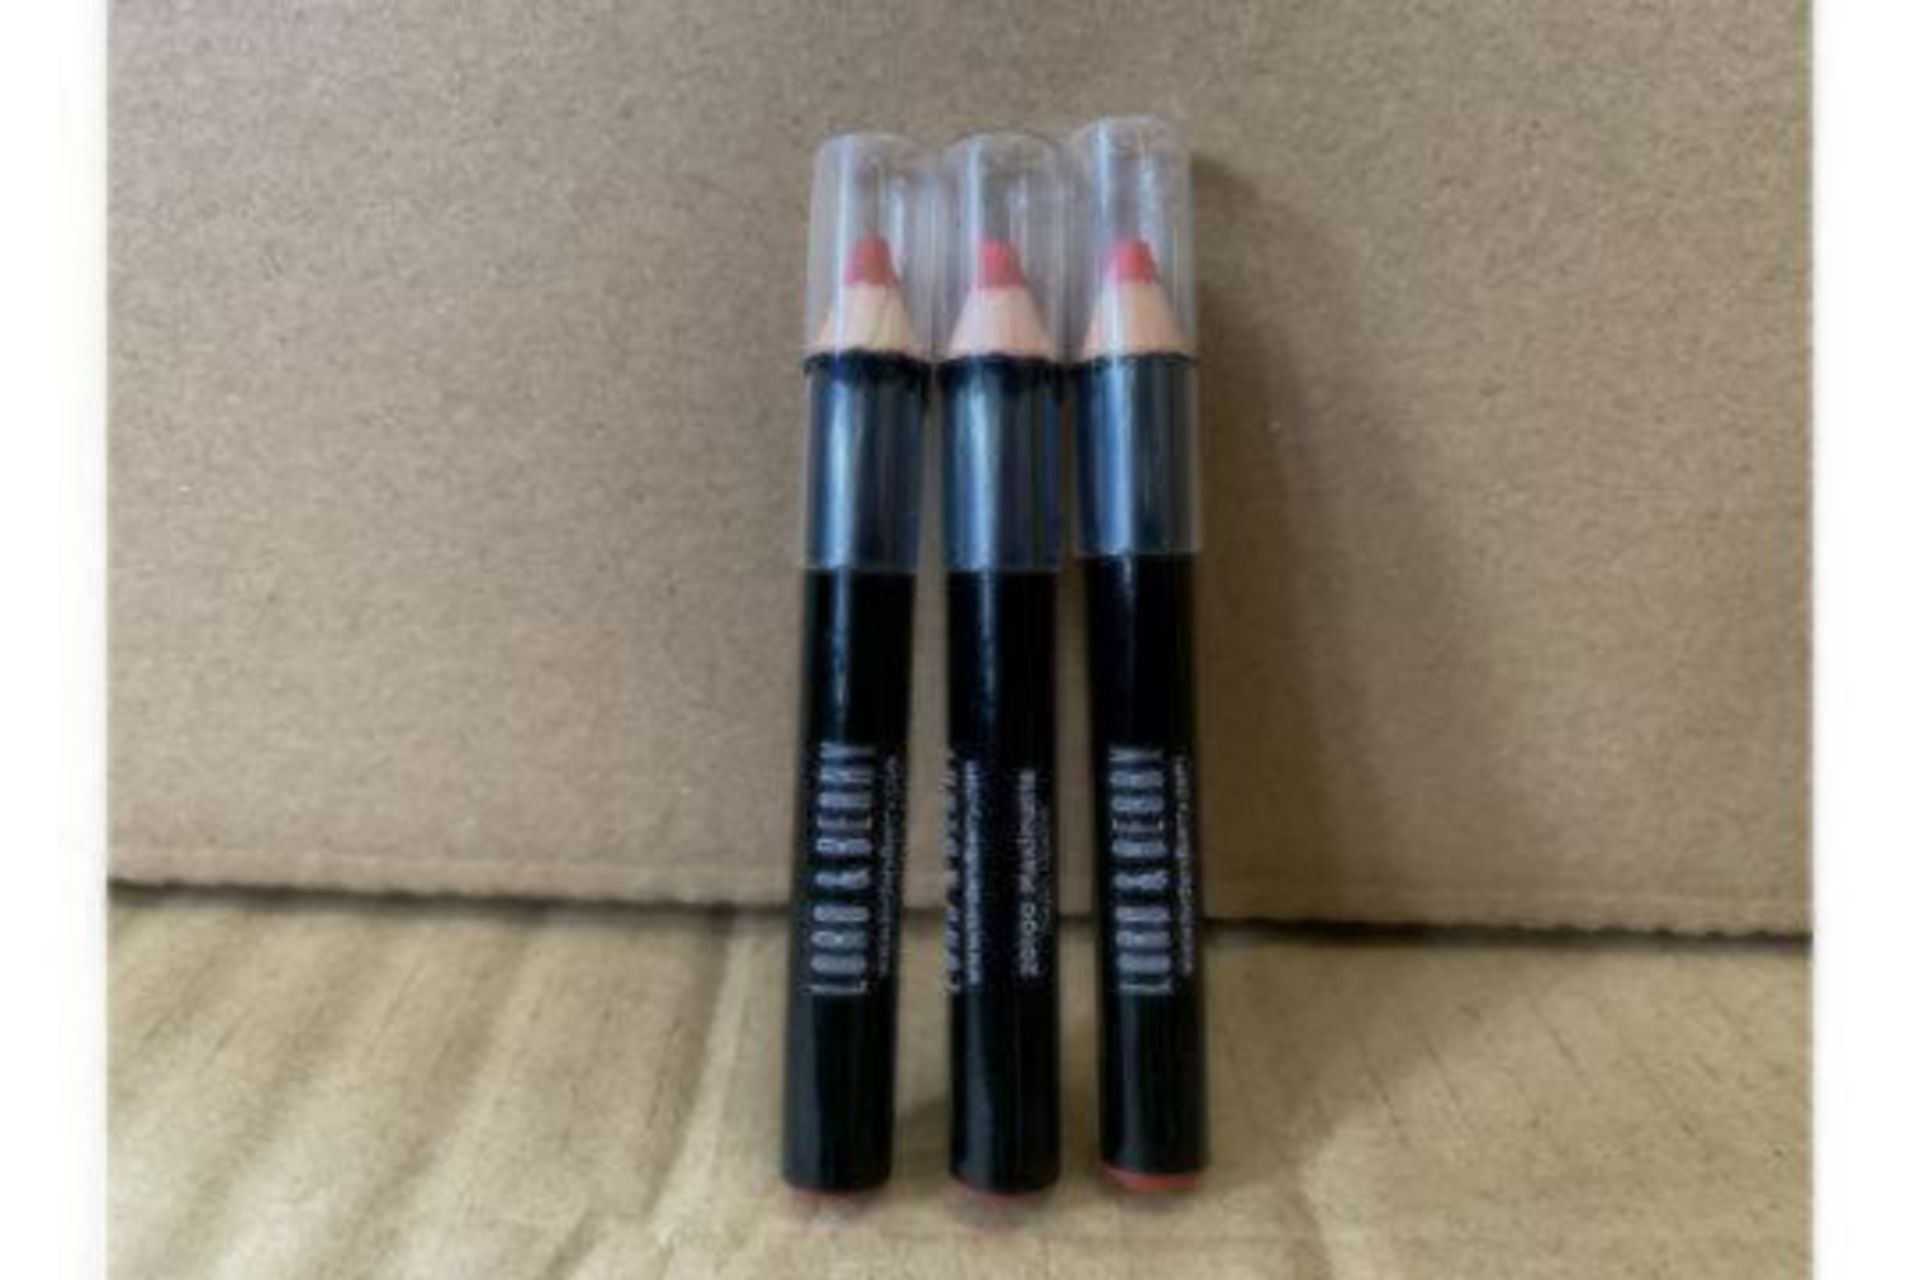 60 X BRAND NEW LORD AND BERRY MAXIMATTE PENCIL INTIMACY CRAYON LIPSTICKS